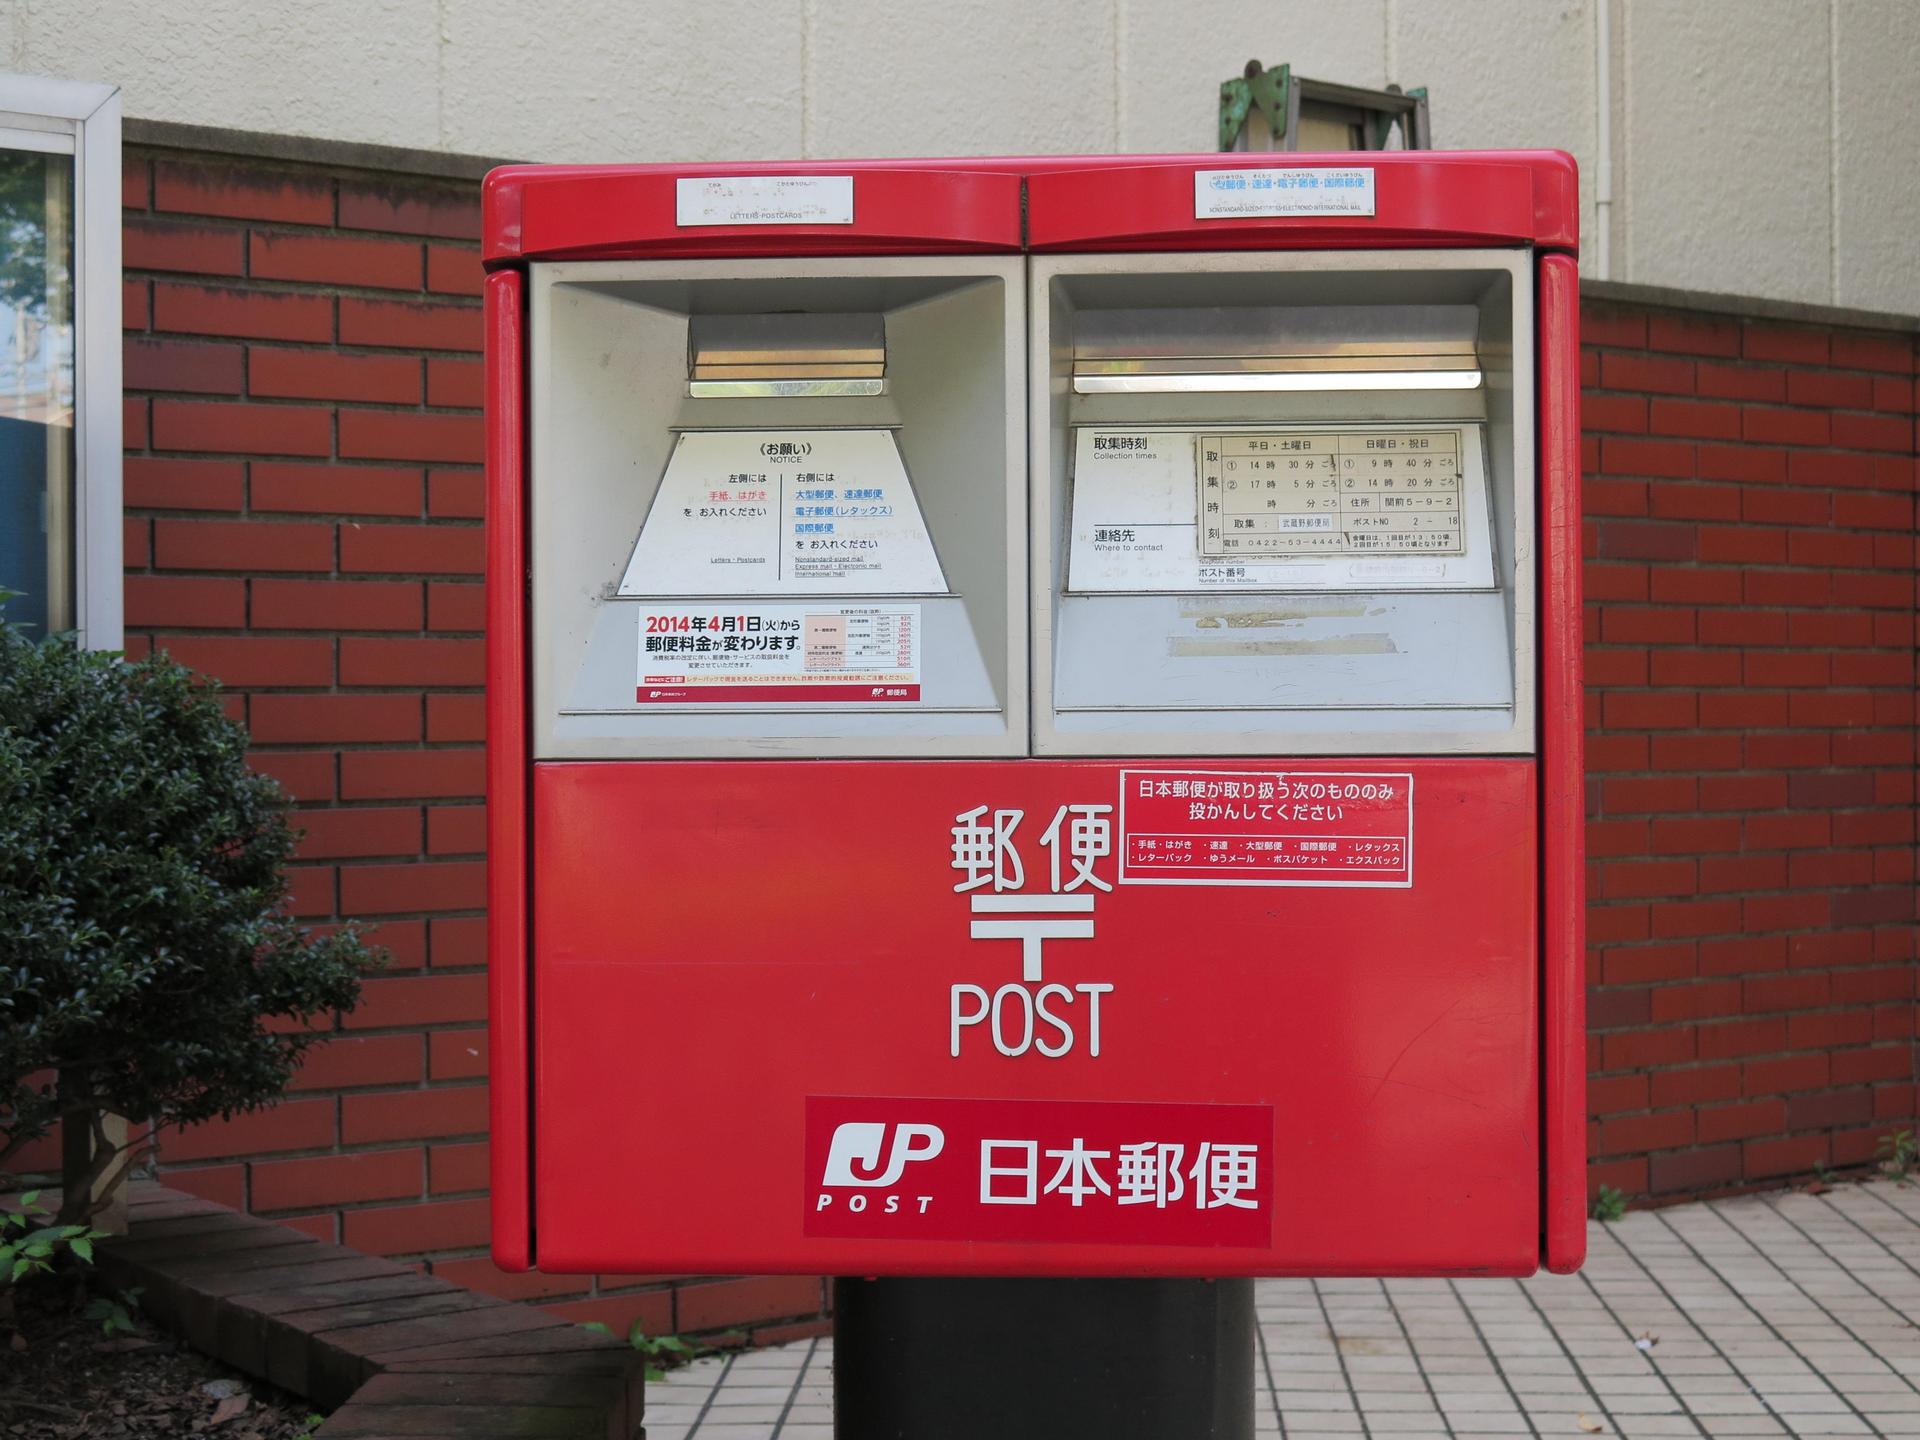 The new boxes are closely modeled after Japan’s own post boxes (pictured above). Photo: WikiCommons / Douglas Paul Perkins